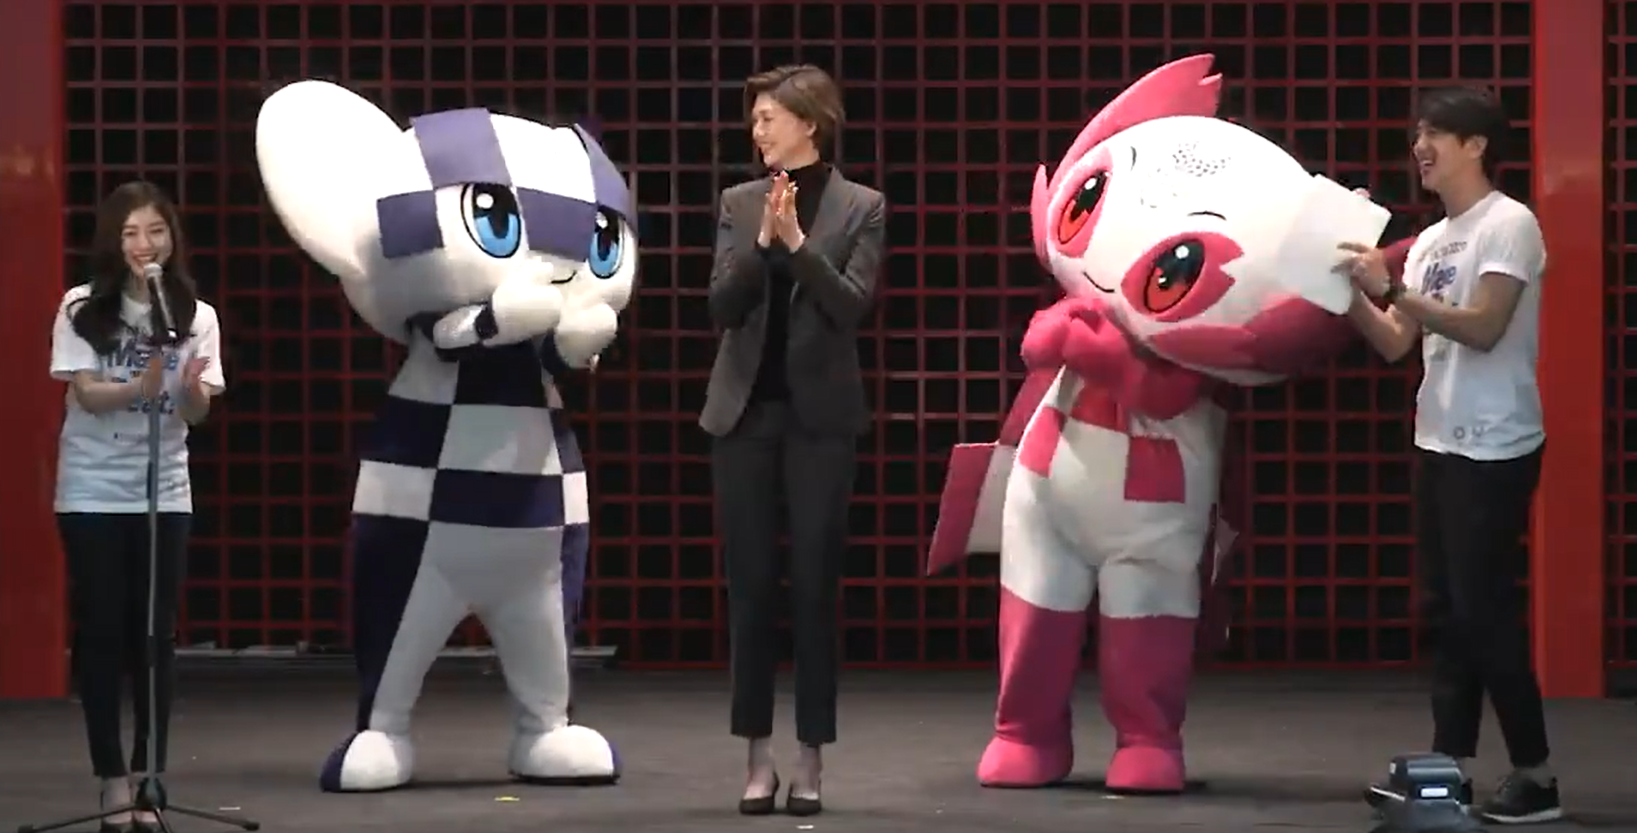 Tokyo 2020 mascots attend ceremony before six-city "Make the Beat!" tour